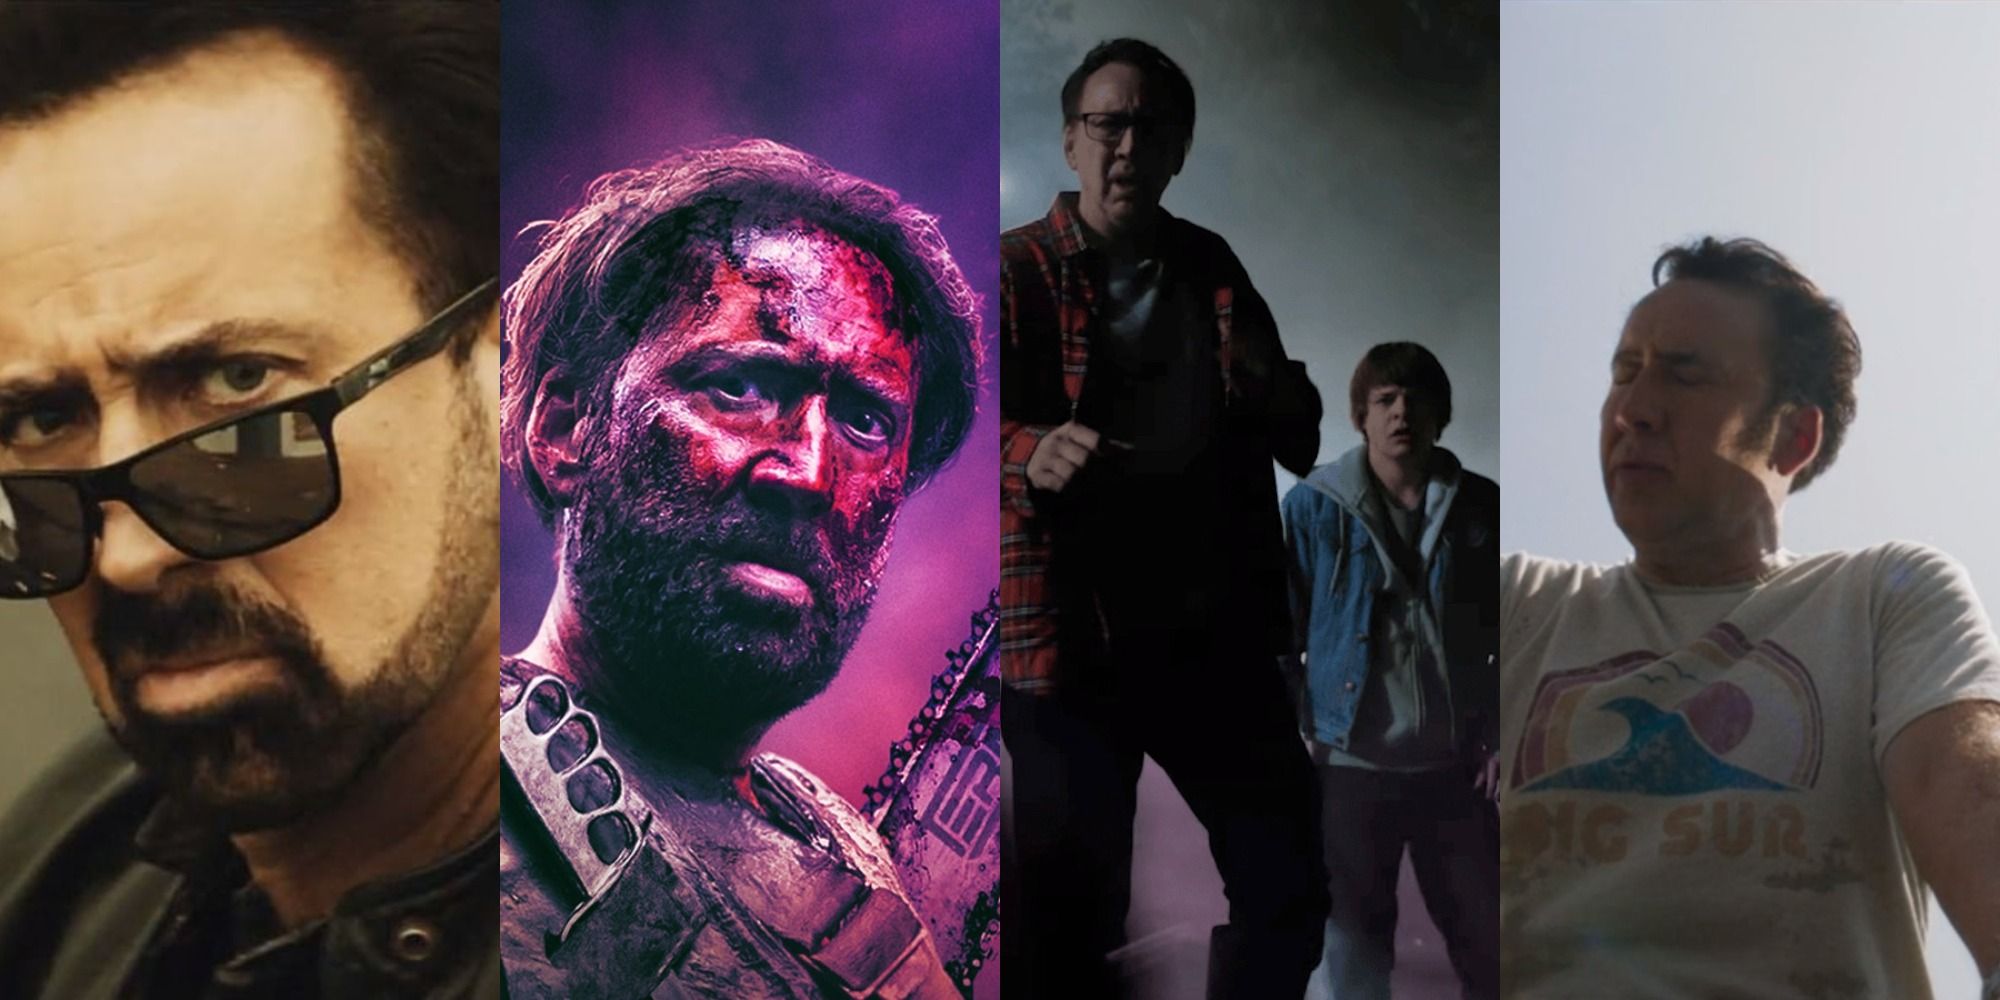 Nicolas Cage in Willy's Wonderland, Mandy, Color Out of Space, and Mom and Dad